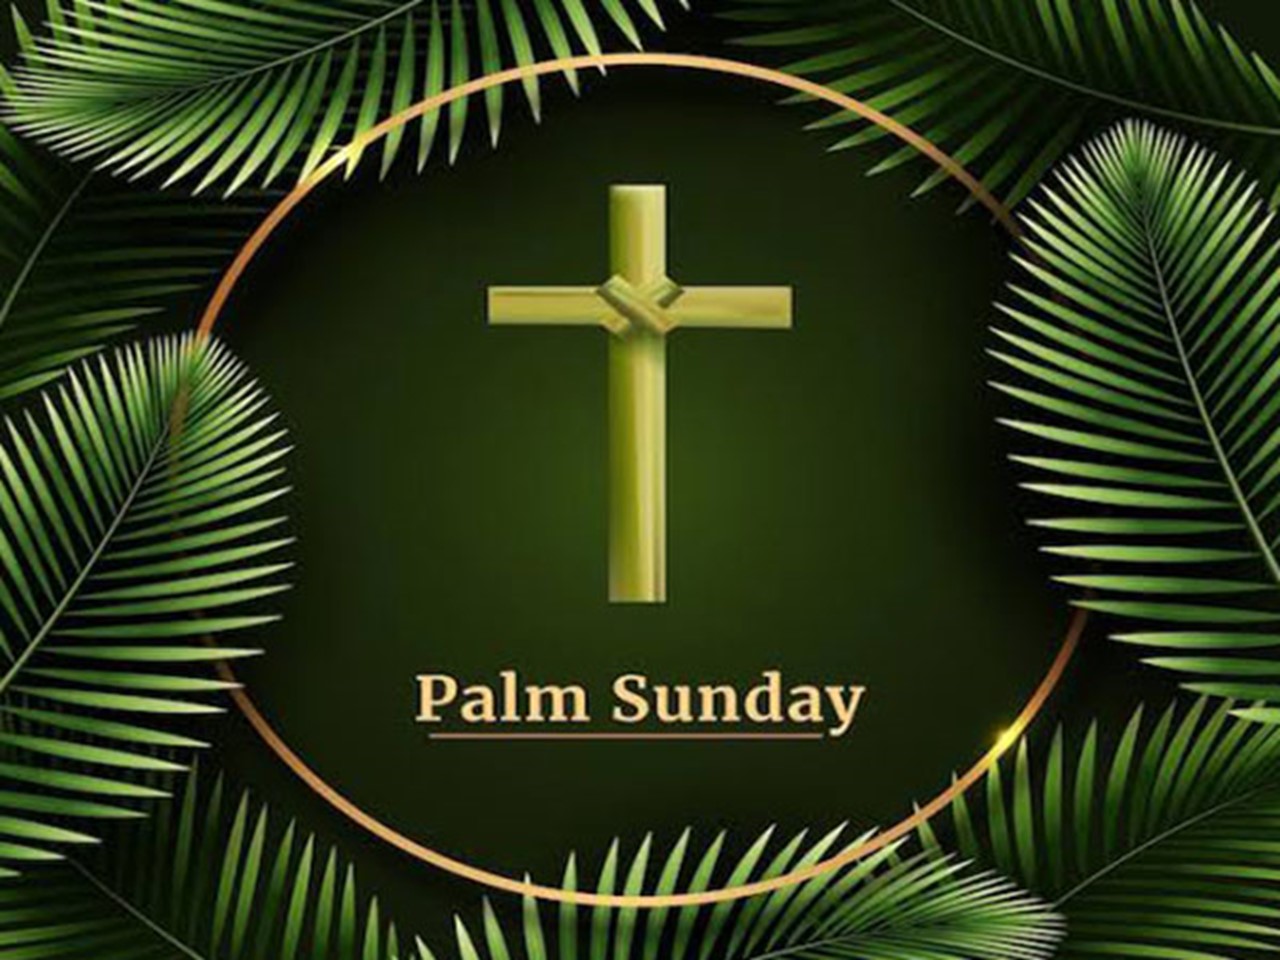 Know about holy week and significance of Palm Sunday | Lifestyle